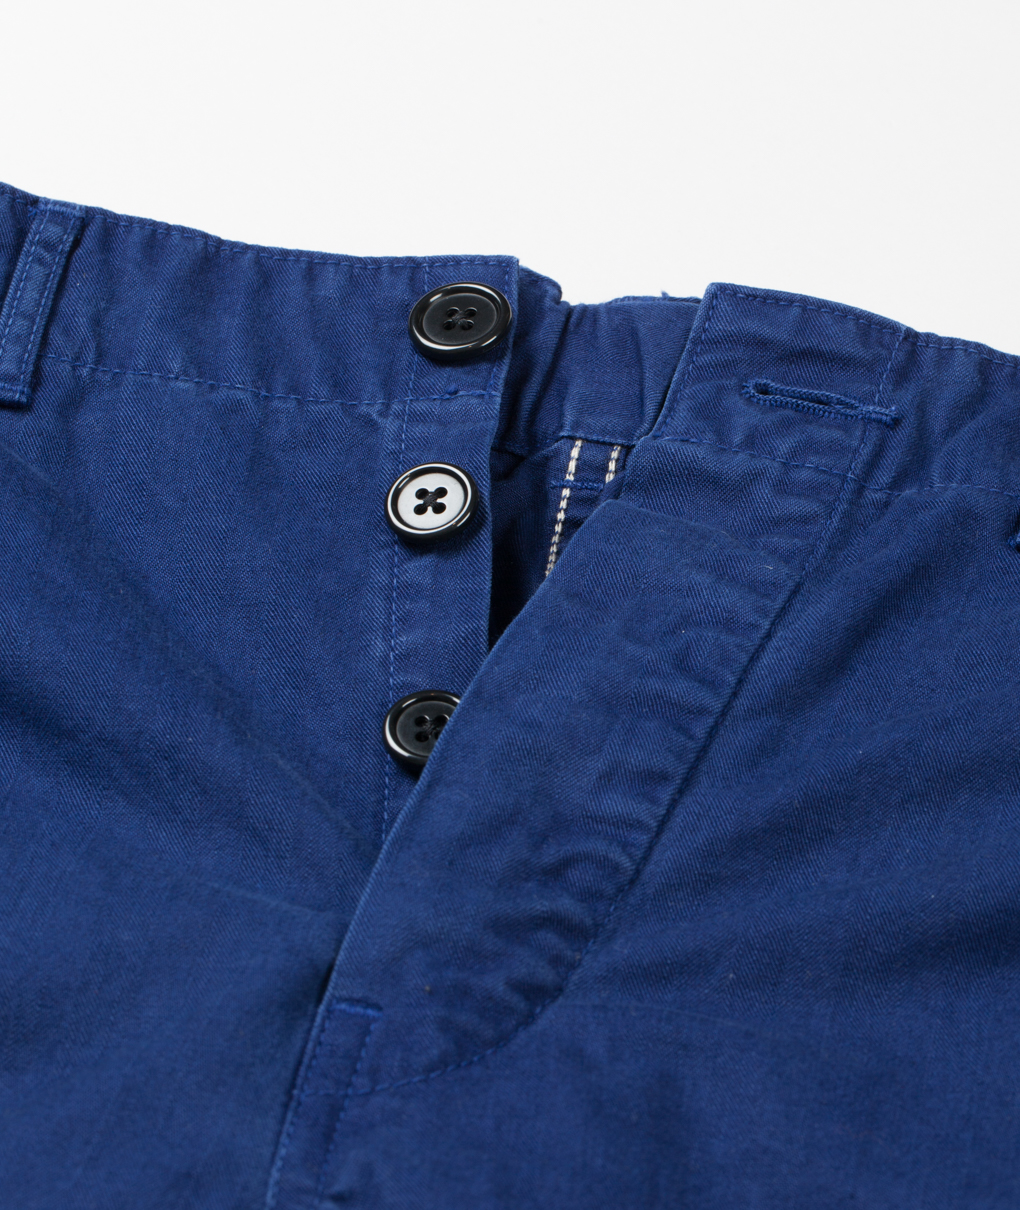 Norse Store | Shipping Worldwide - Orslow French Work Pant